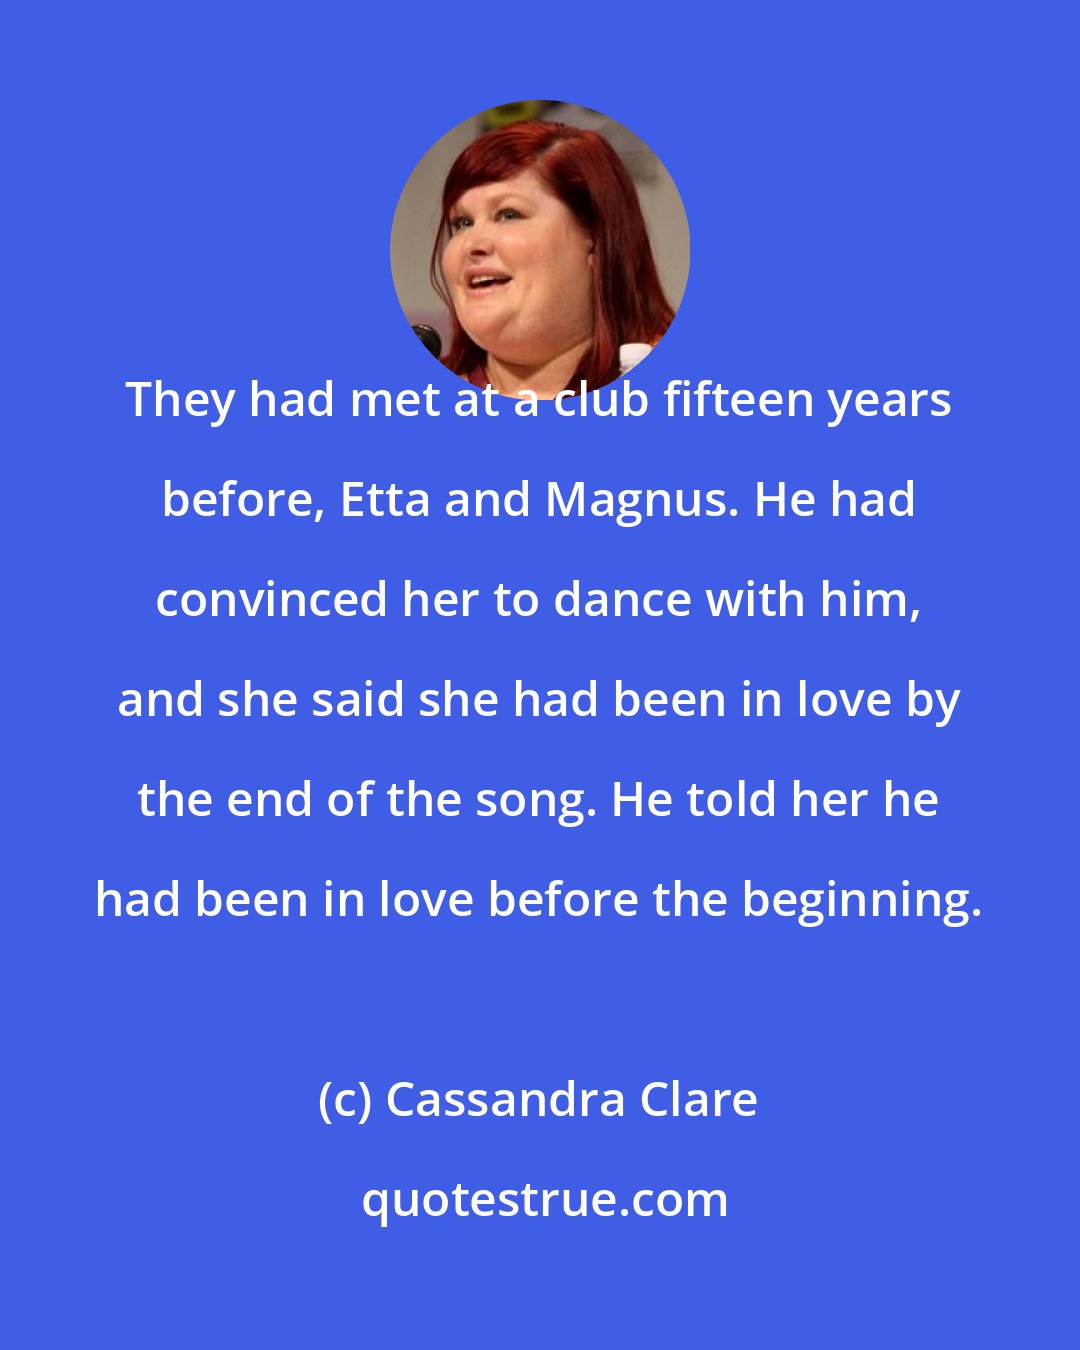 Cassandra Clare: They had met at a club fifteen years before, Etta and Magnus. He had convinced her to dance with him, and she said she had been in love by the end of the song. He told her he had been in love before the beginning.